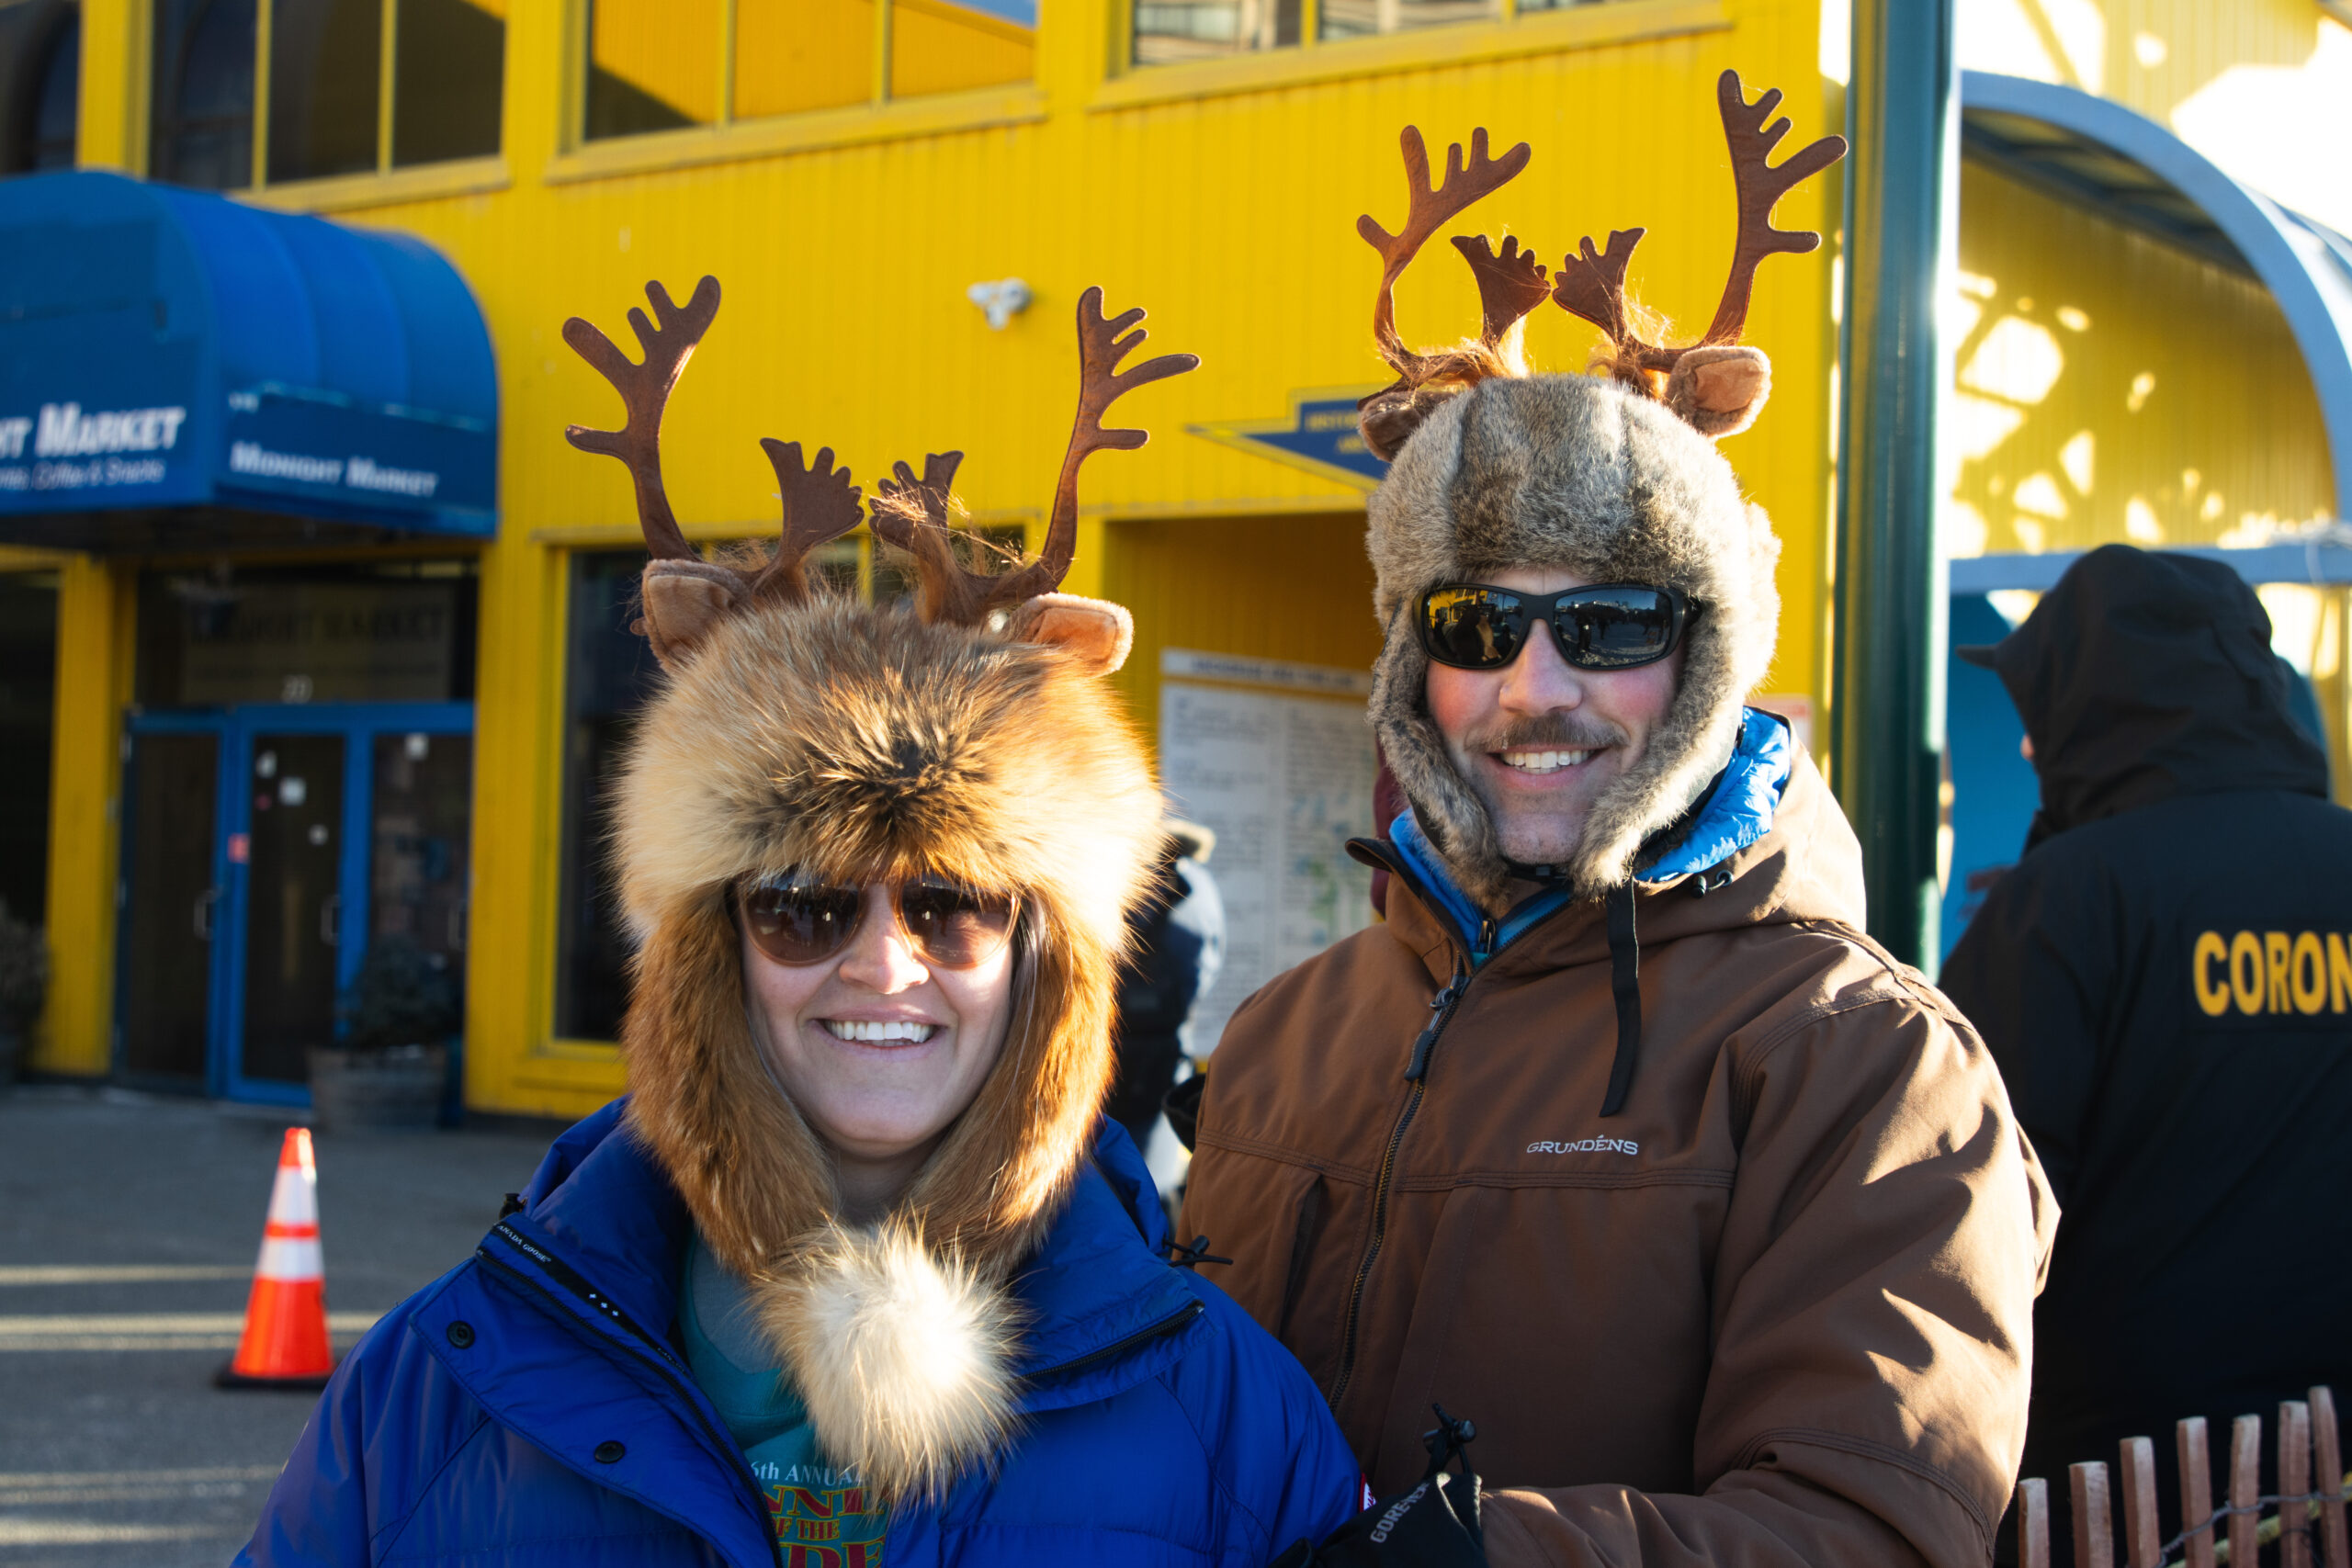 A man and a woman with fake decorative antlers pose for a photo in front of a yellow building.